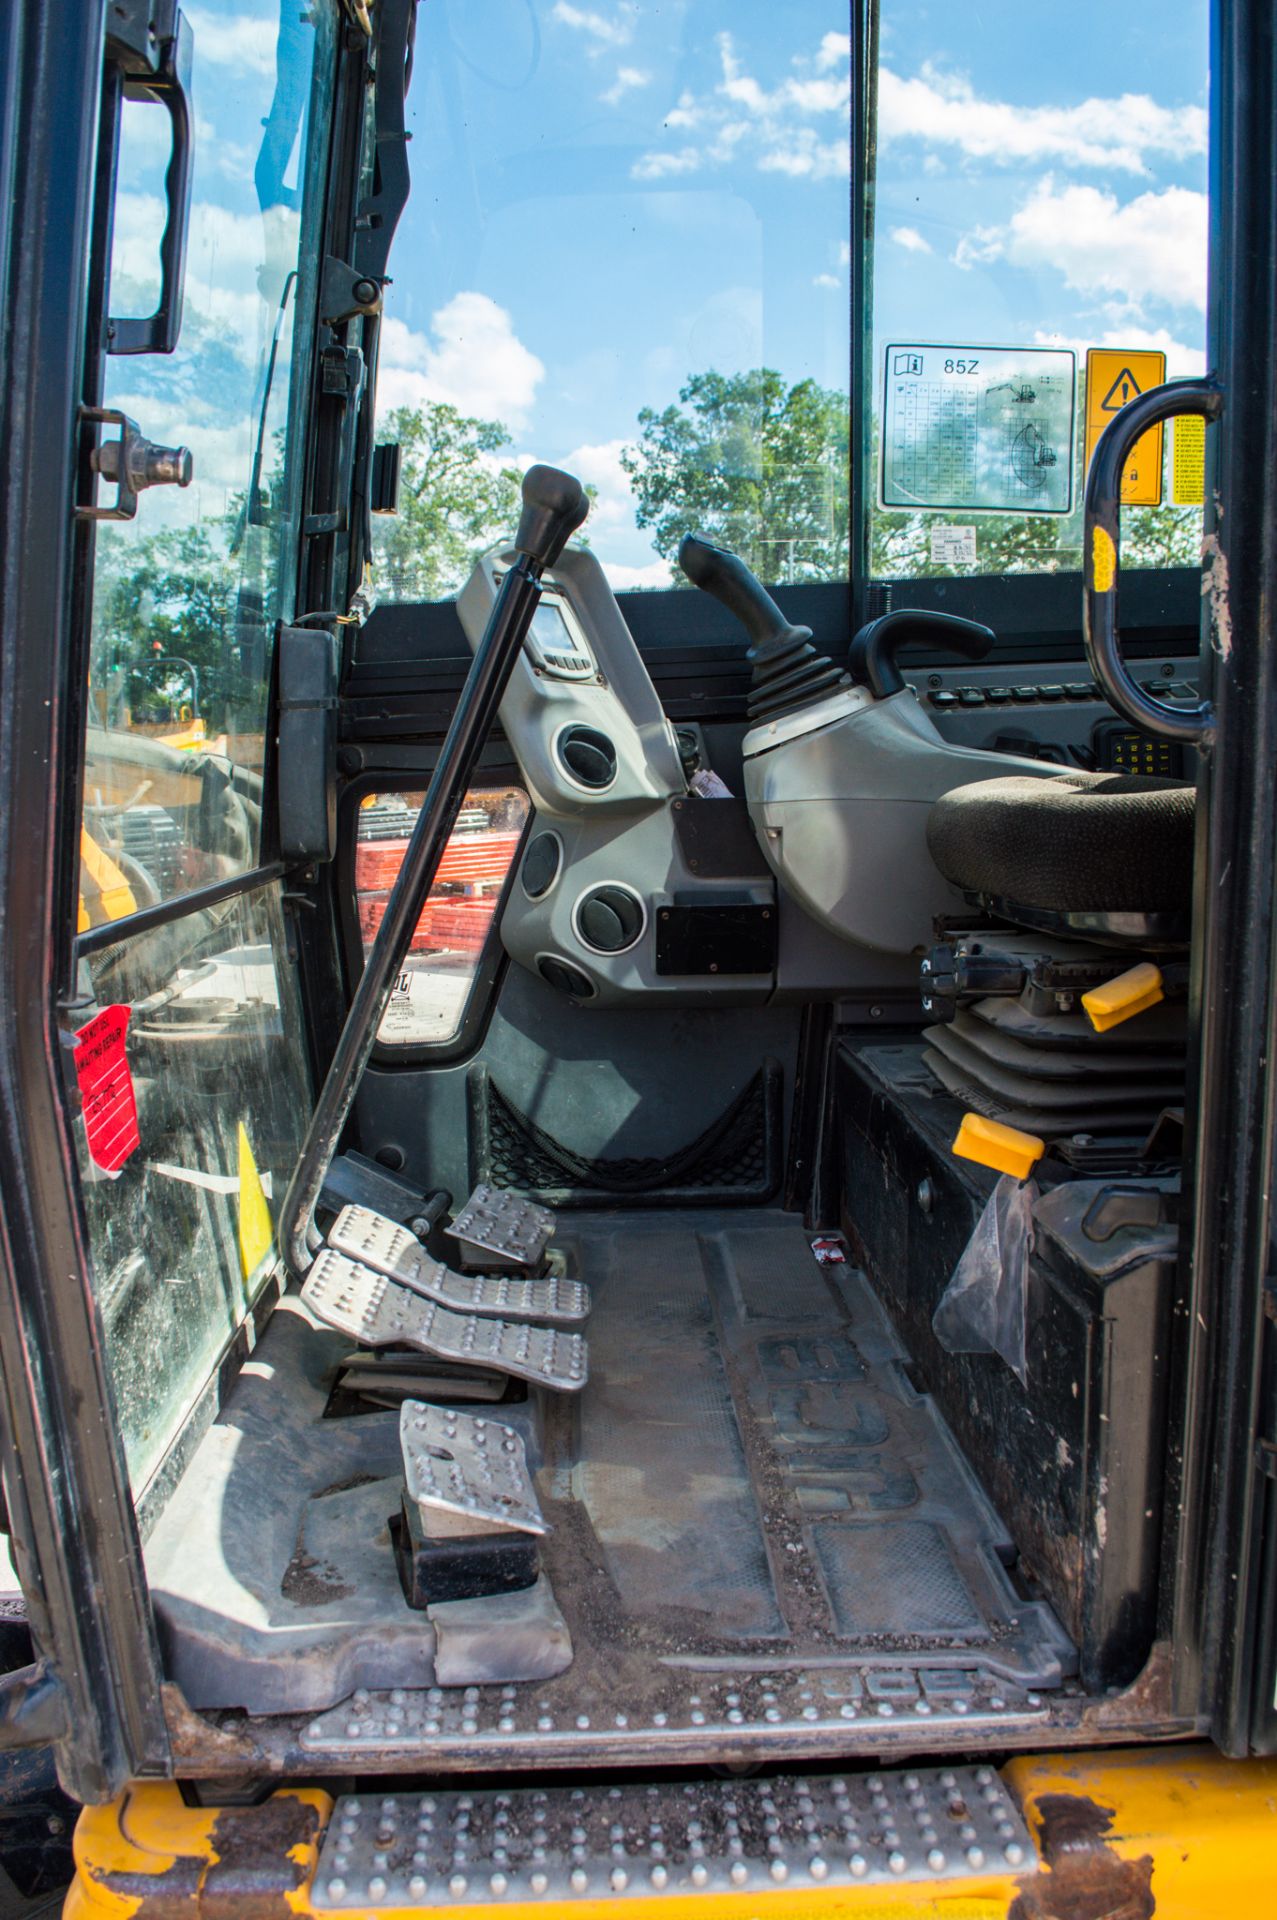 JCB 85z-1 8.5 tonne rubber tracked midi excavator Year: 2014 S/N: 2248796 Recorded Hours: 4719 - Image 21 of 24